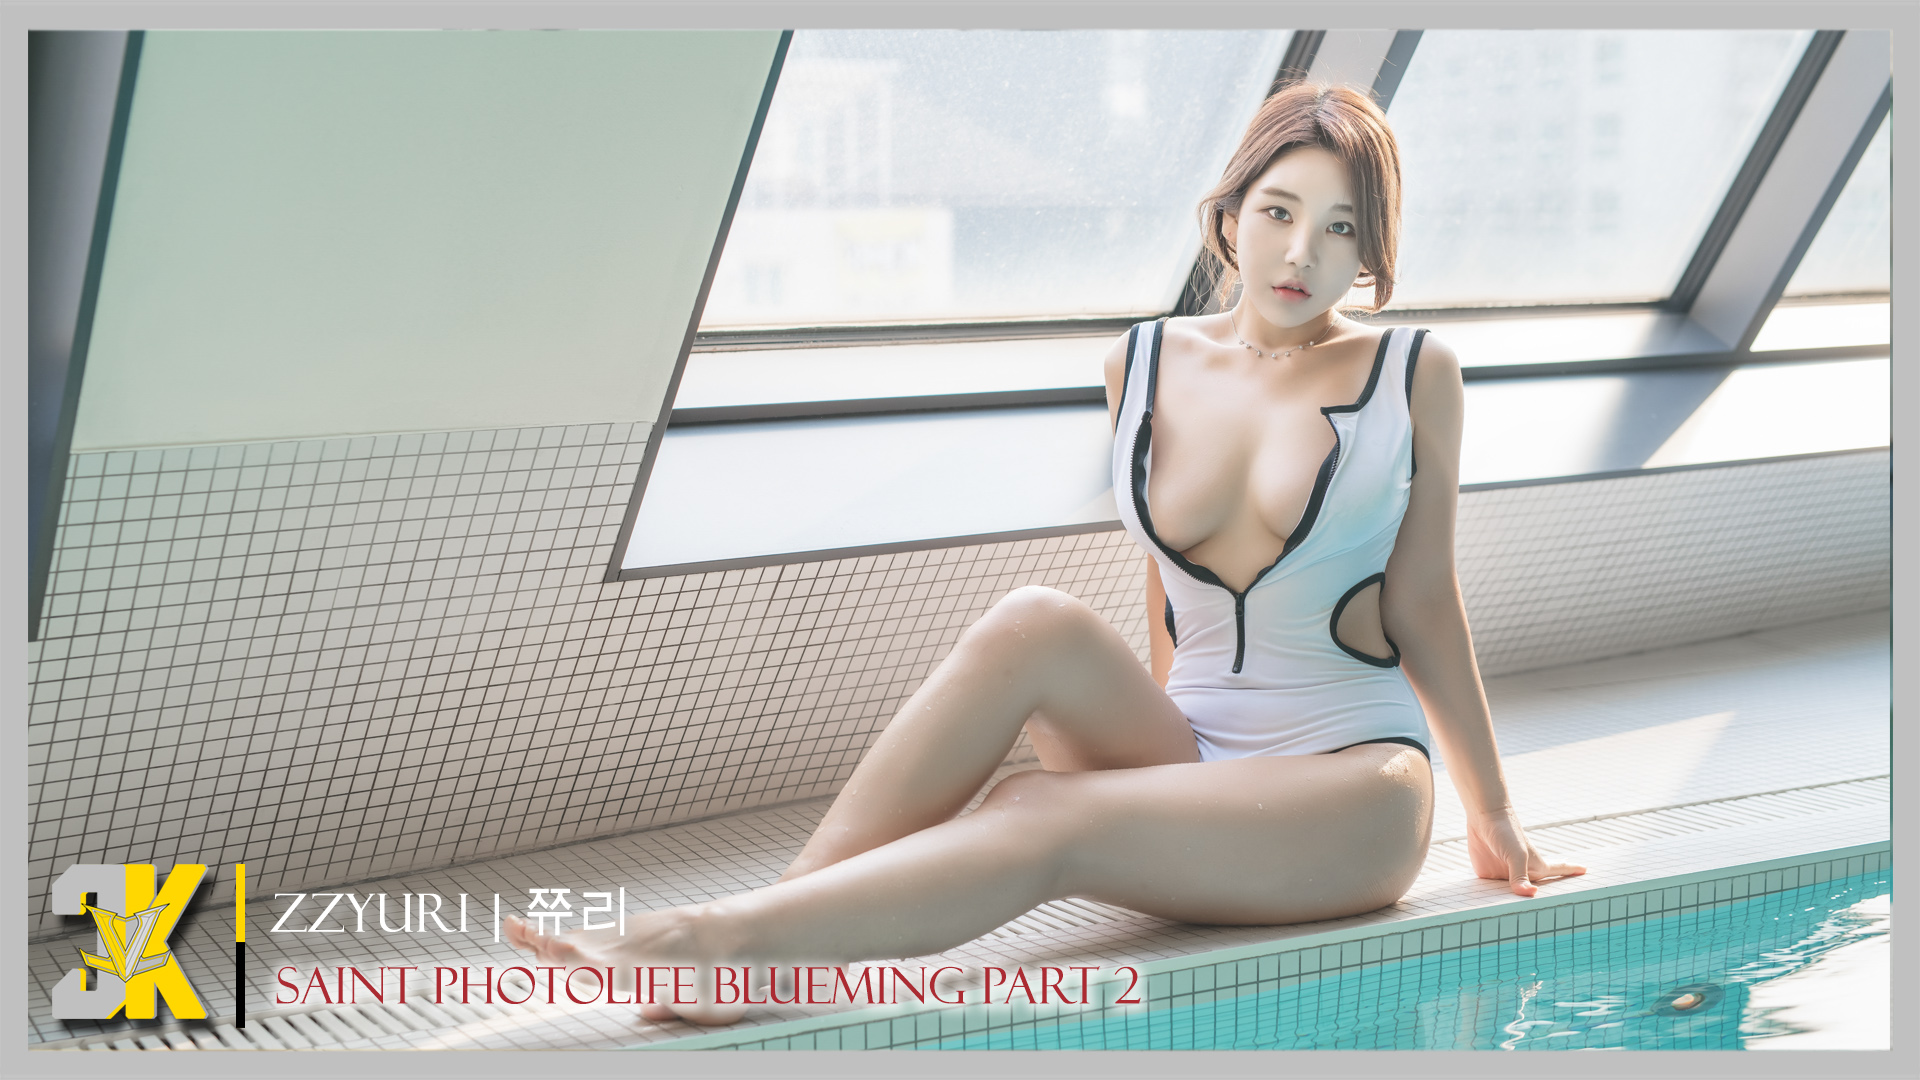 This is the sample picture from Zzyuri｜쮸리 - SAINT Photolife - Blueming 2 post. Click here to see image full size.